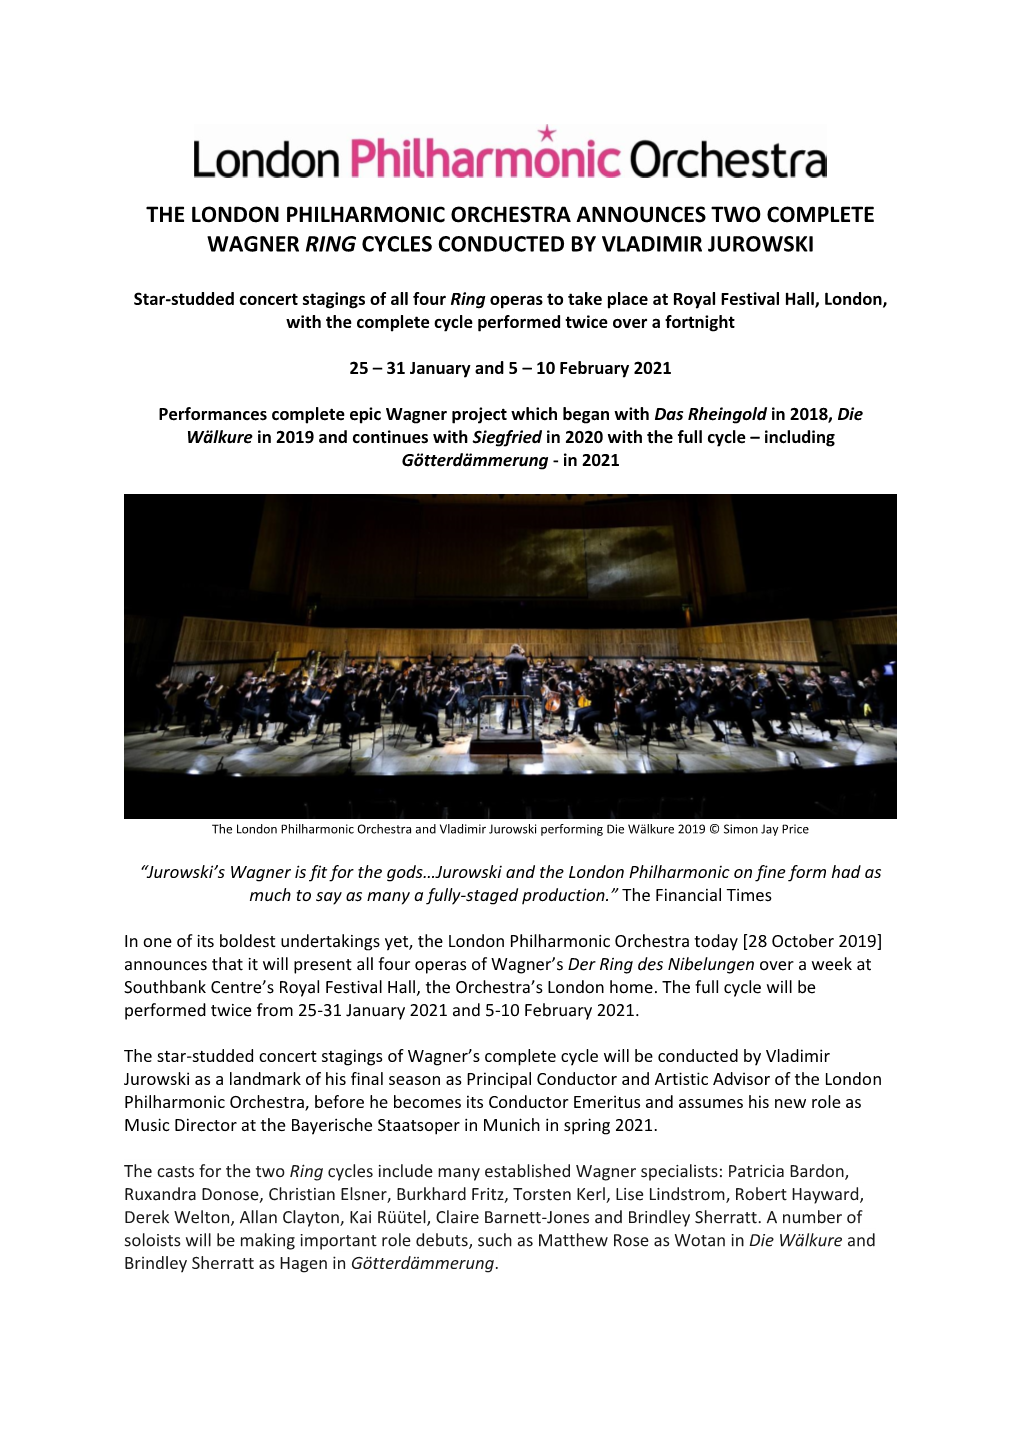 The London Philharmonic Orchestra Announces Two Complete Wagner Ring Cycles Conducted by Vladimir Jurowski